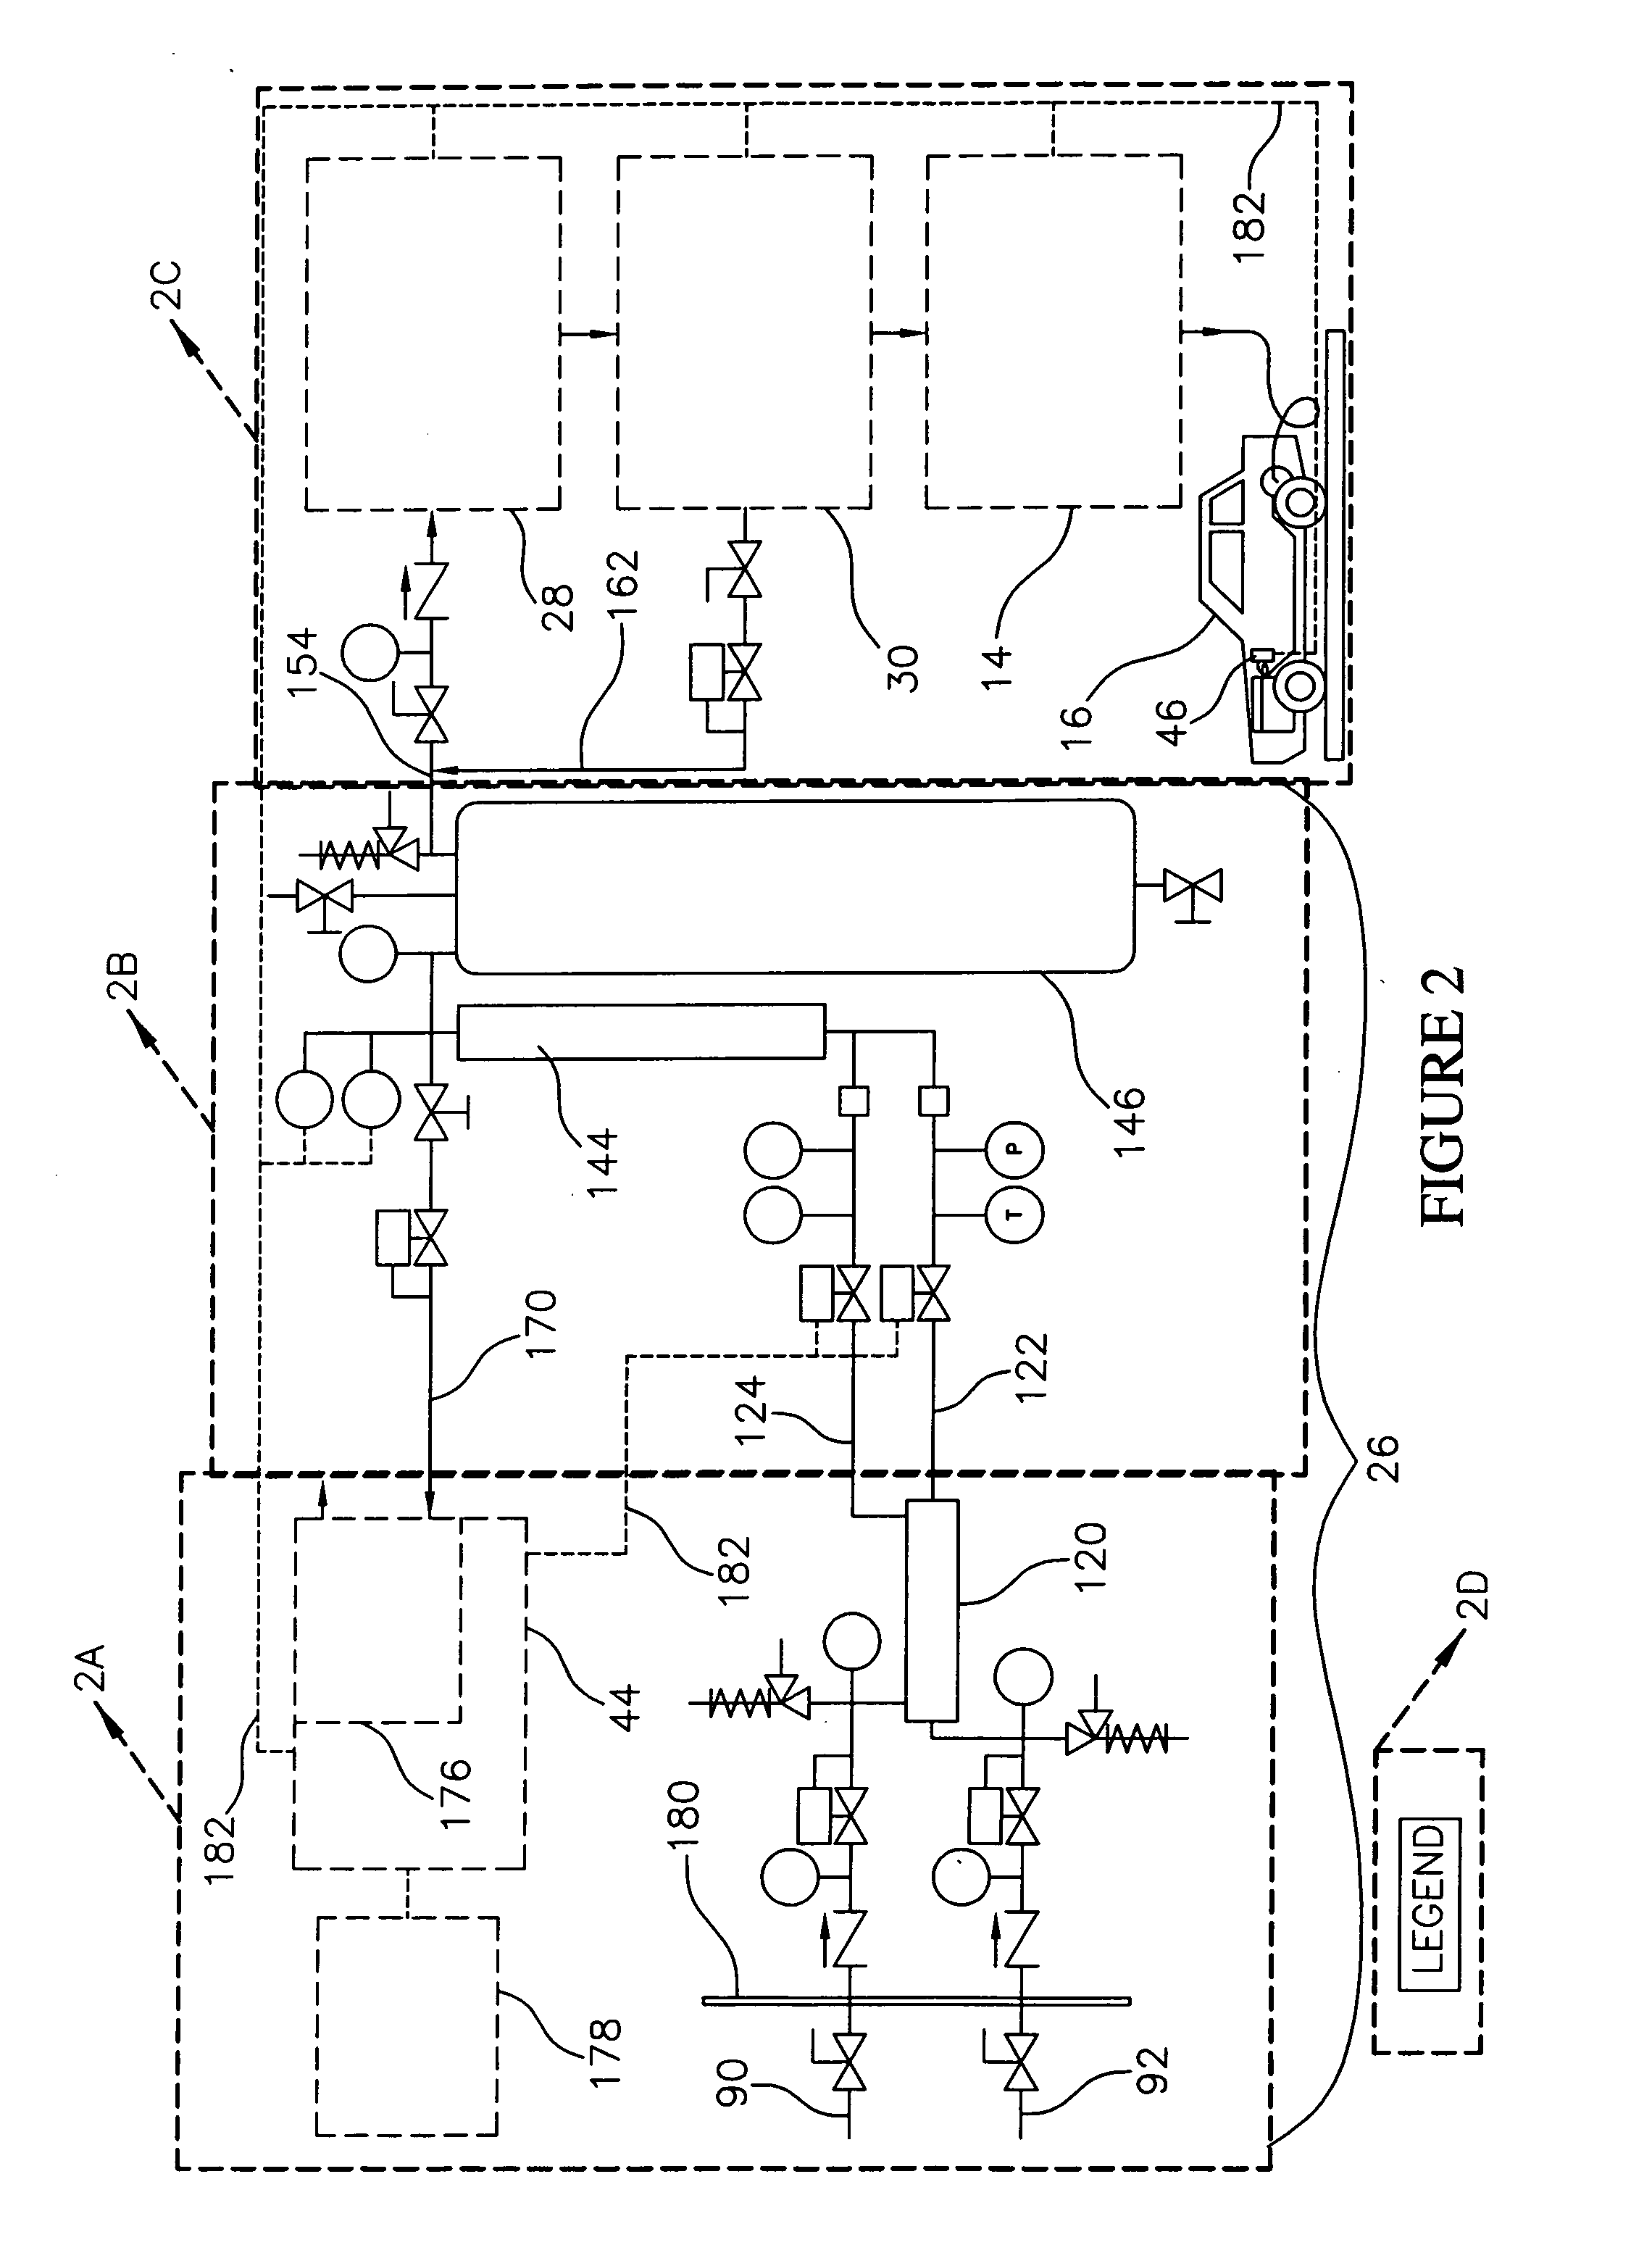 System and method for producing, dispensing, using and monitoring a hydrogen enriched fuel